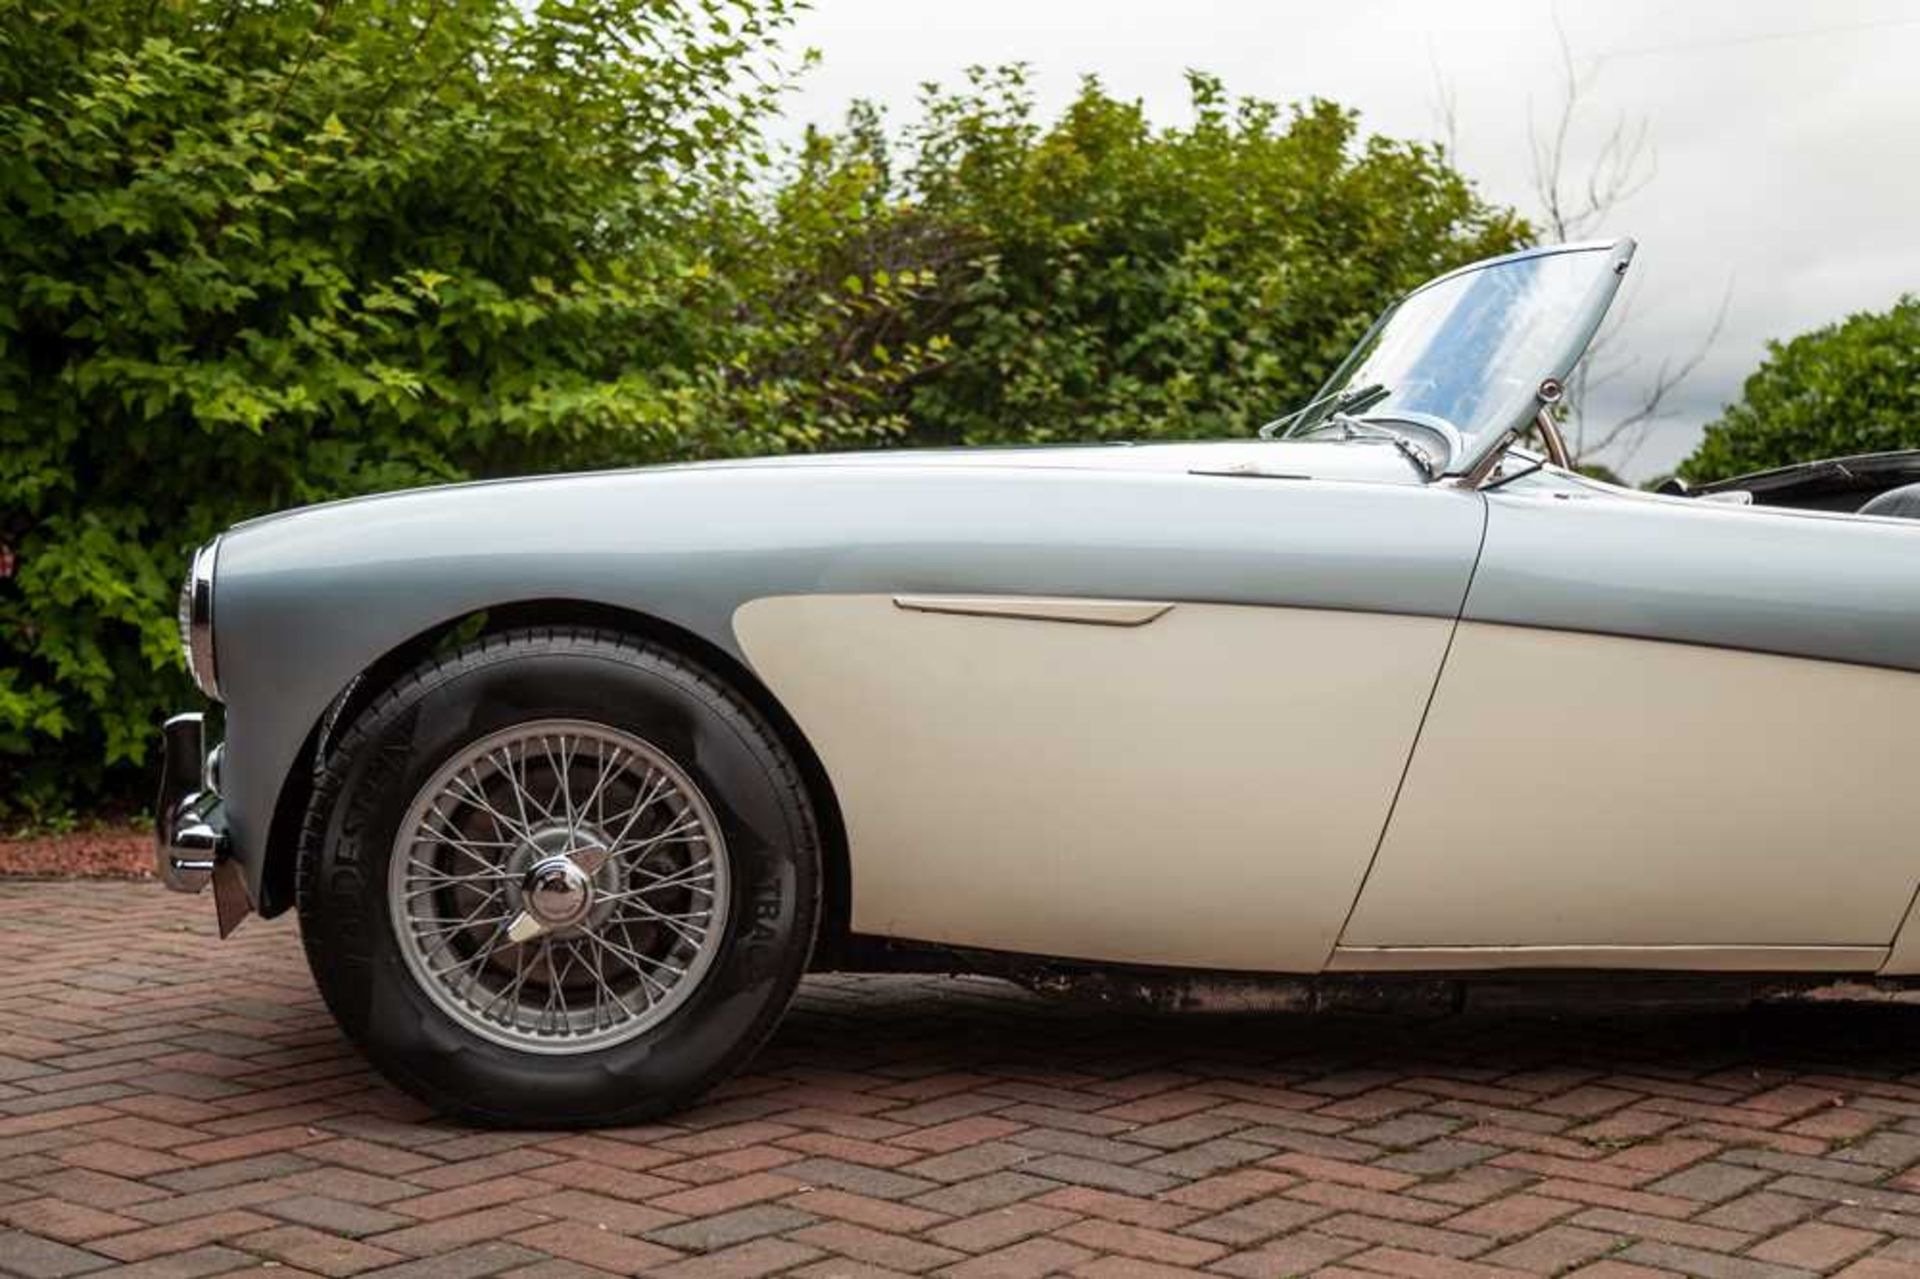 1955 Austin-Healey 100/4 Subtly Upgraded with 5-Speed Transmission and Front Disc Brakes - Image 9 of 54